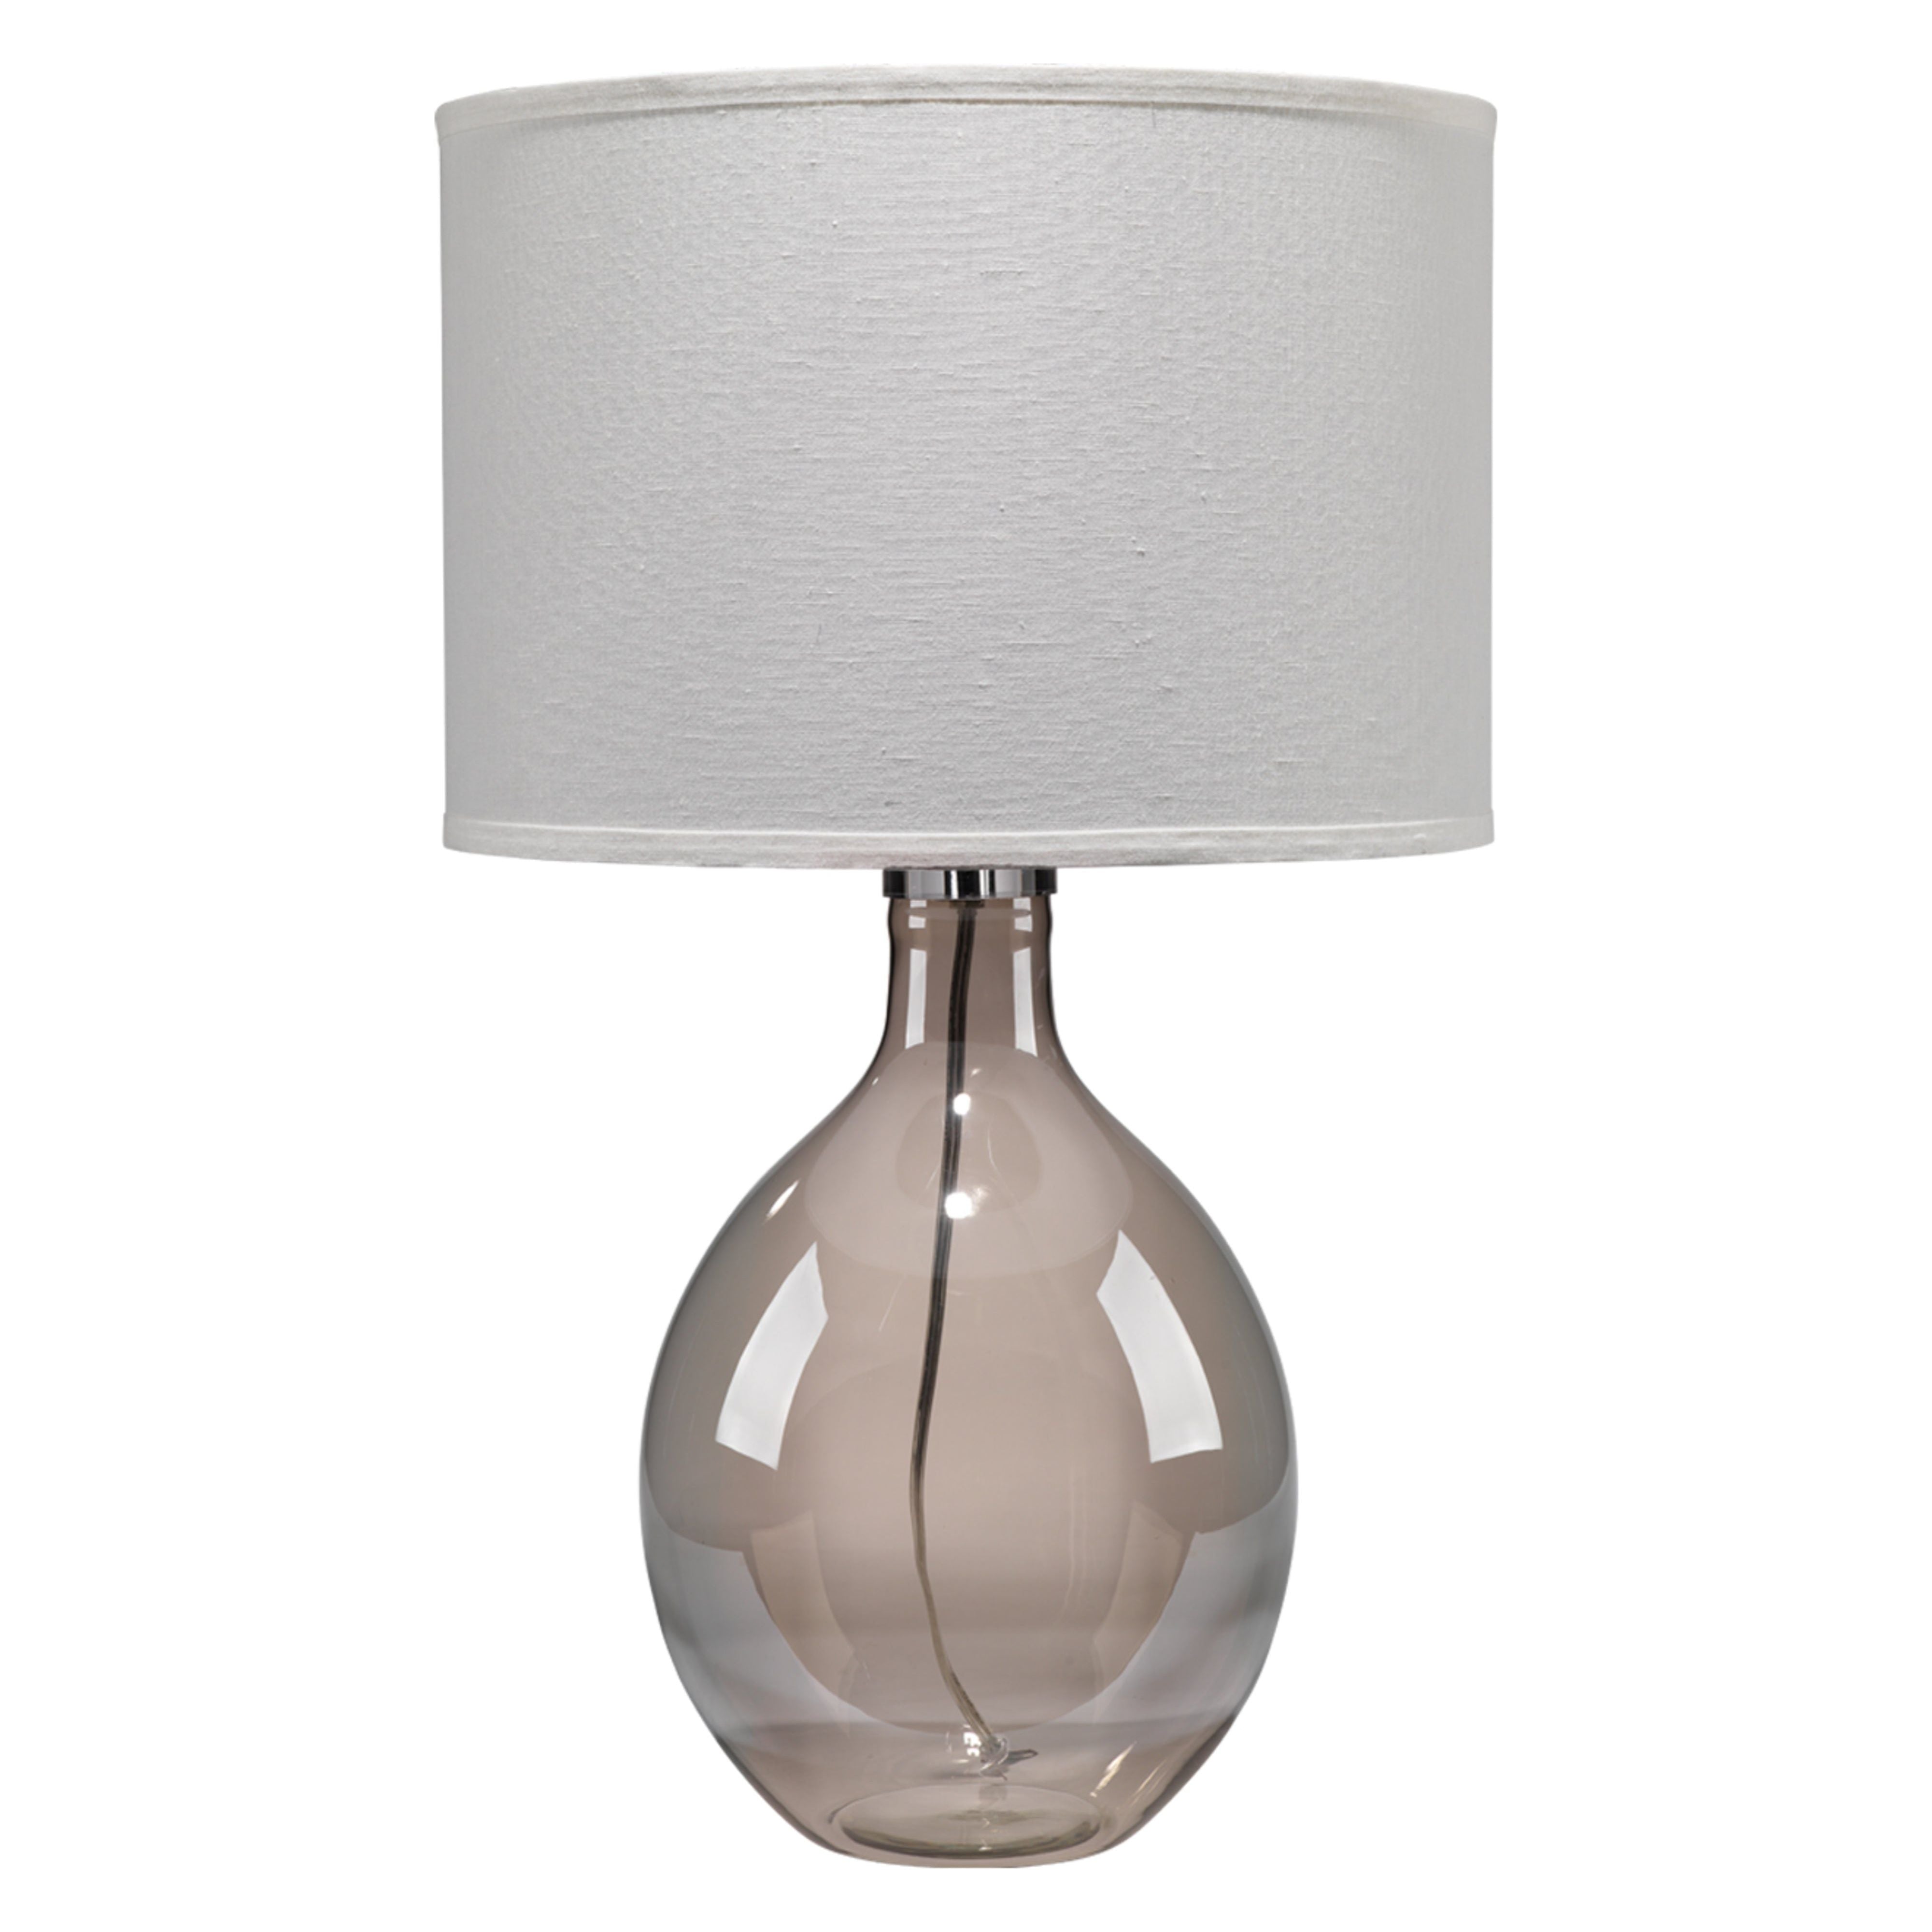 Jamie Young Company - BLRNDGR71CD - Juliette Table Lamp -  - Grey